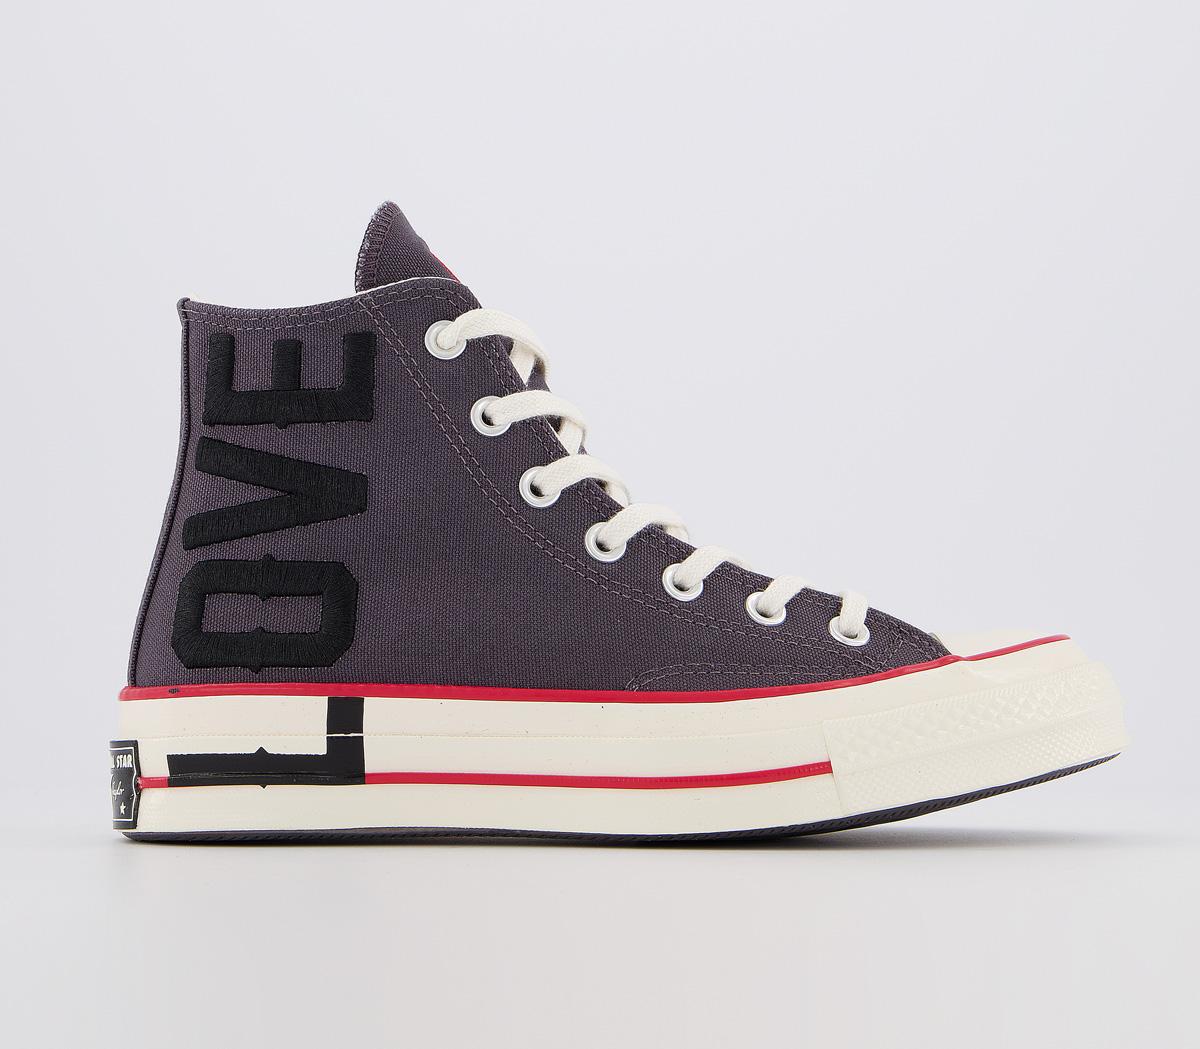 ConverseAll Star Hi 70s TrainersThunder Grey University Red